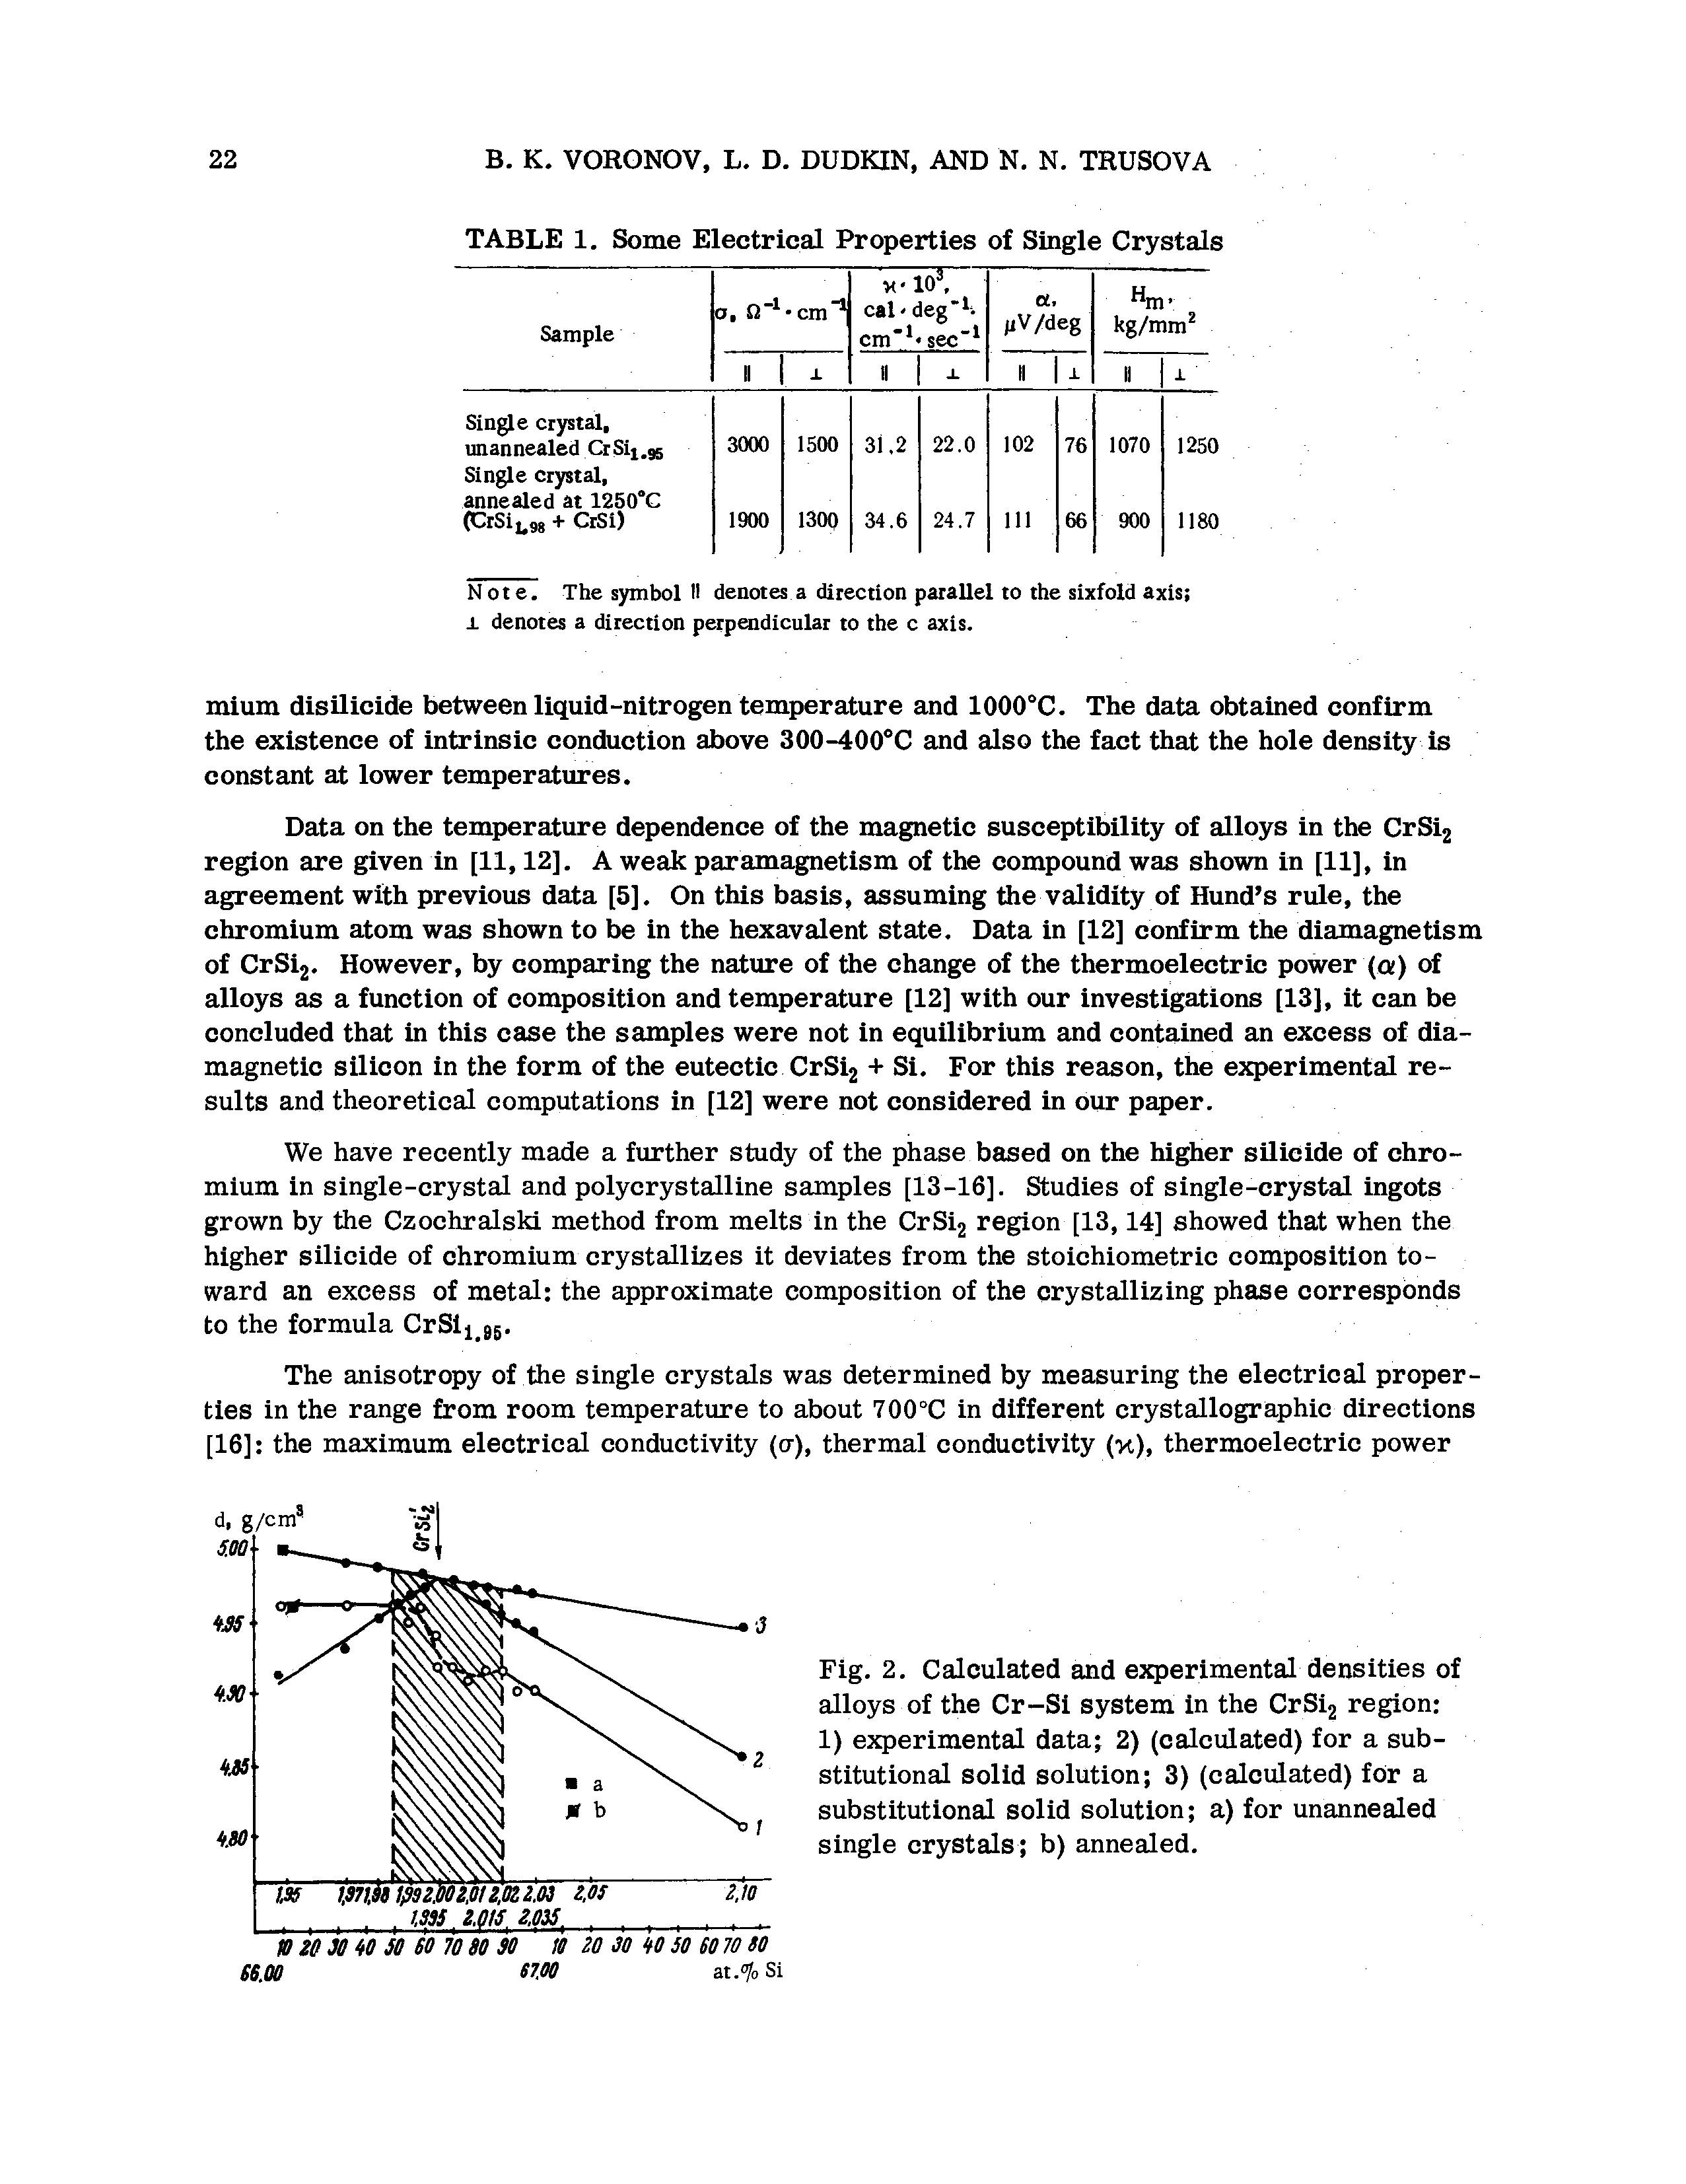 Fig. 2. Calculated and experimental densities of alloys of the Cr-Si system in the CrSi2 region 1) experimental data 2) (calculated) for a substitutional solid solution 3) (calculated) for a substitutional solid solution a) for unannealed single crystals b) annealed.